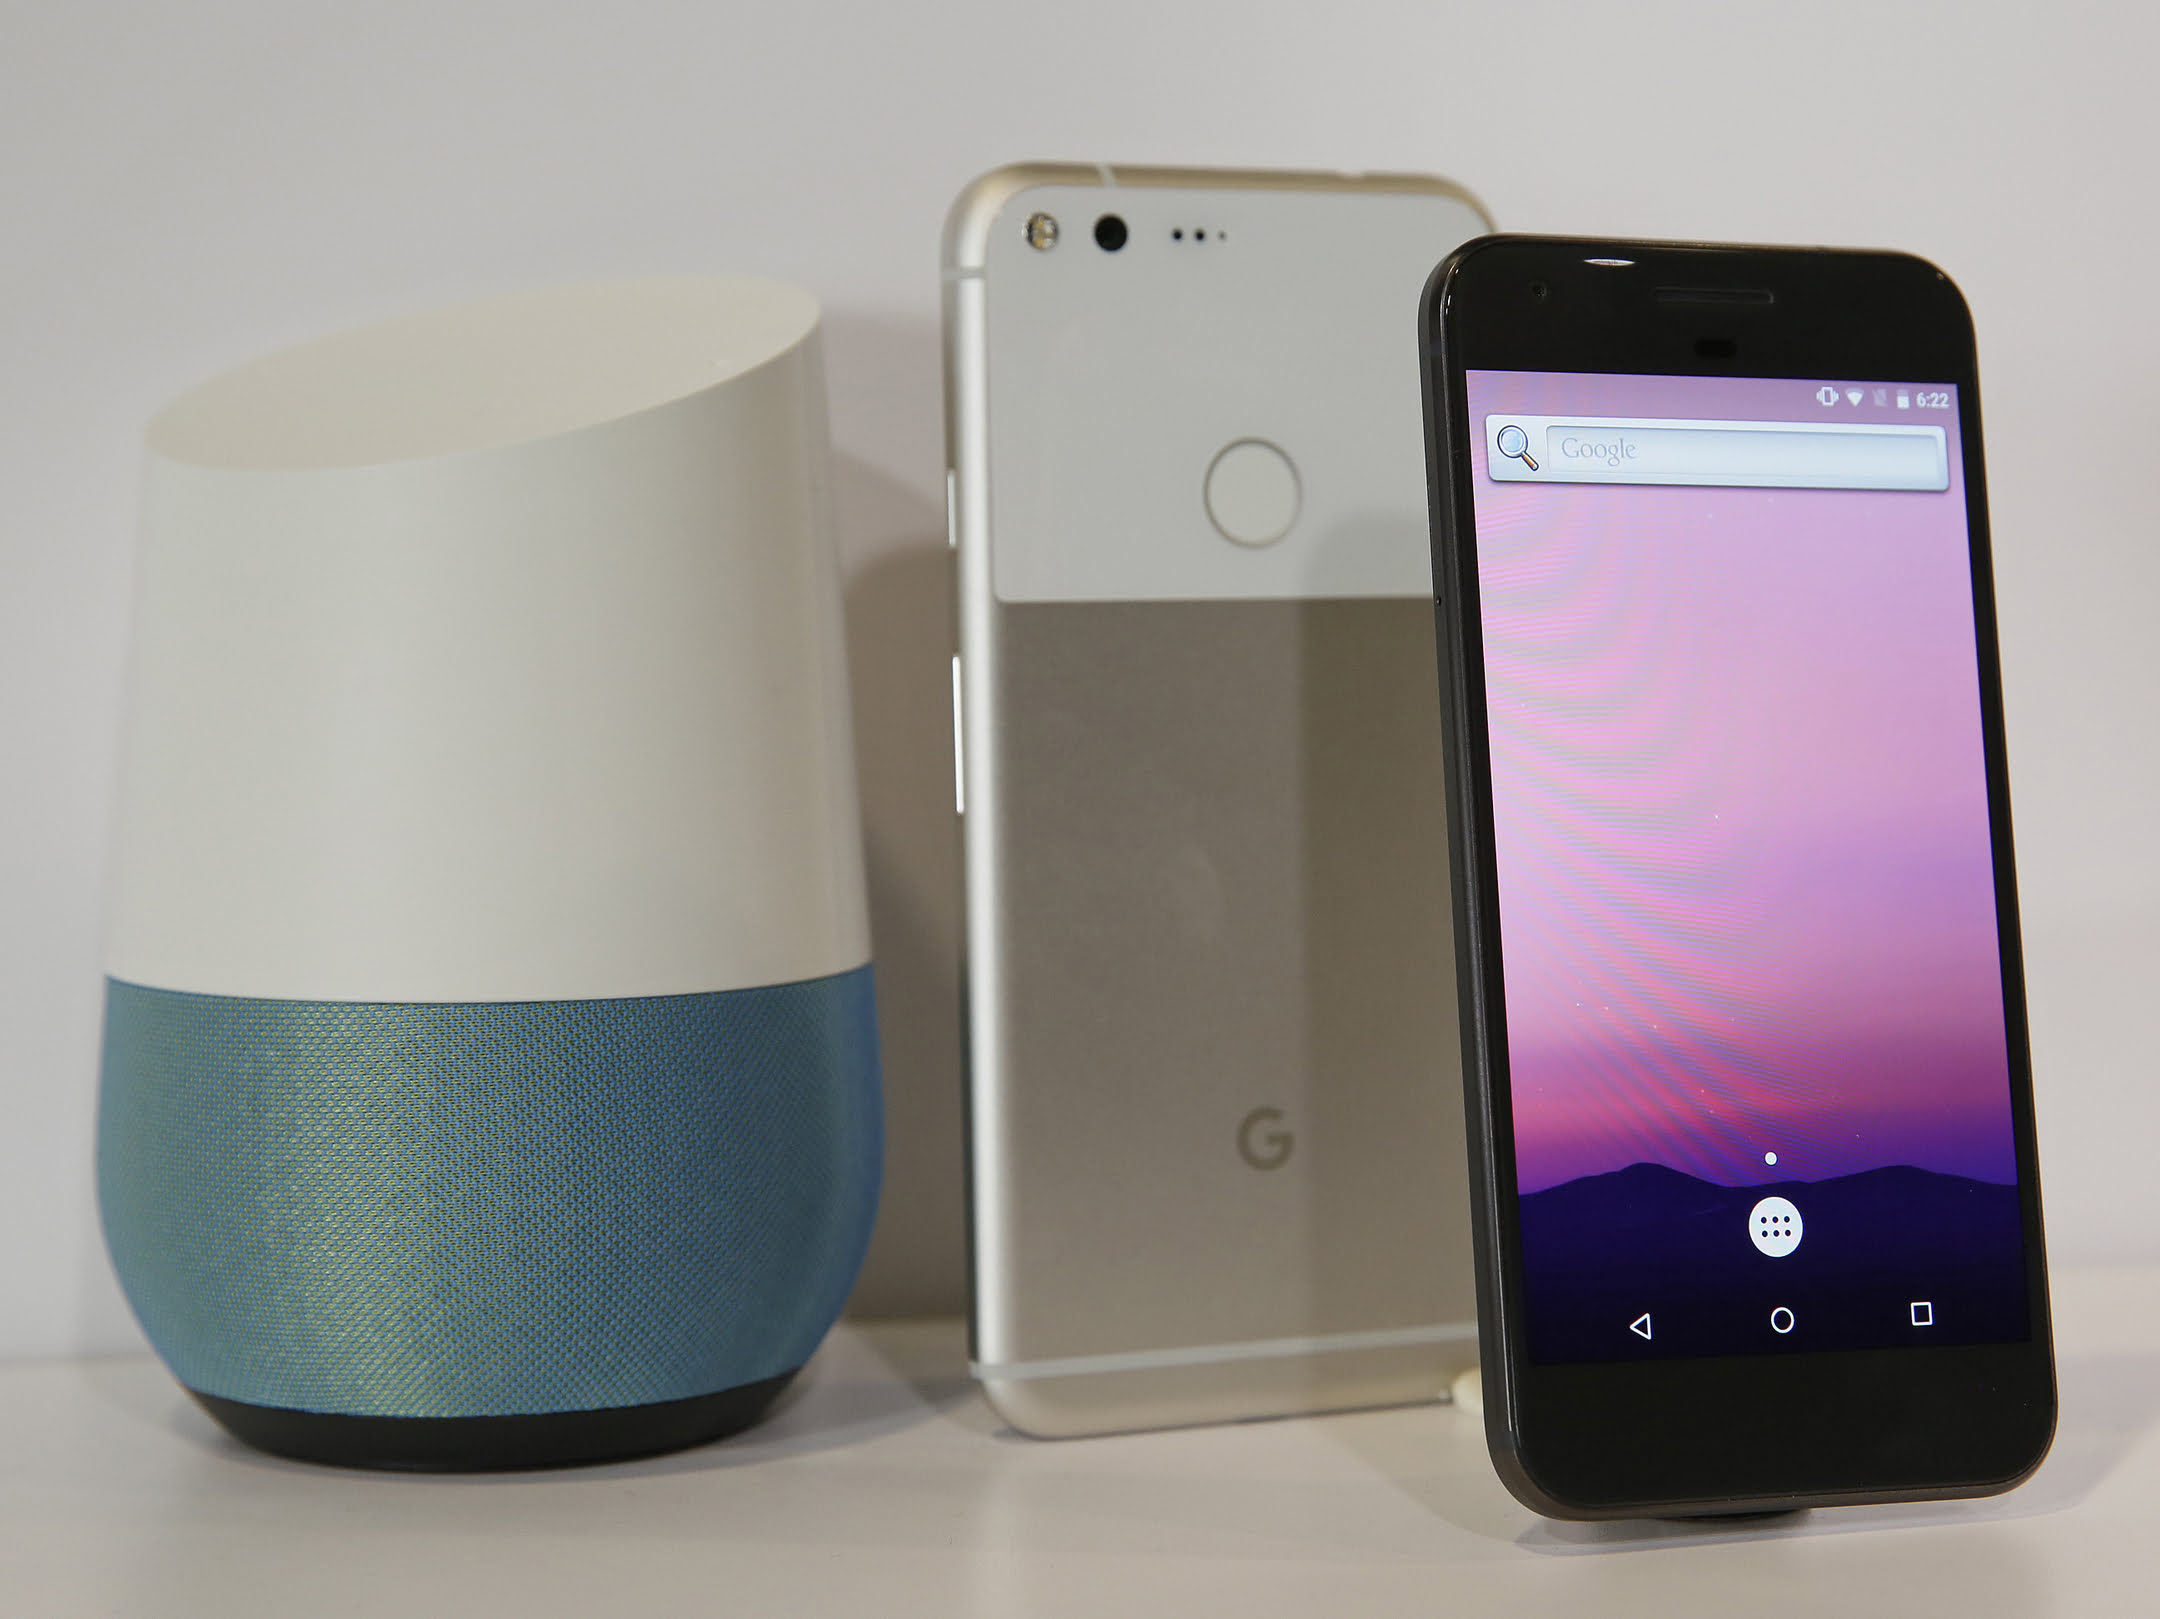 How To Connect Google Home To My Phone